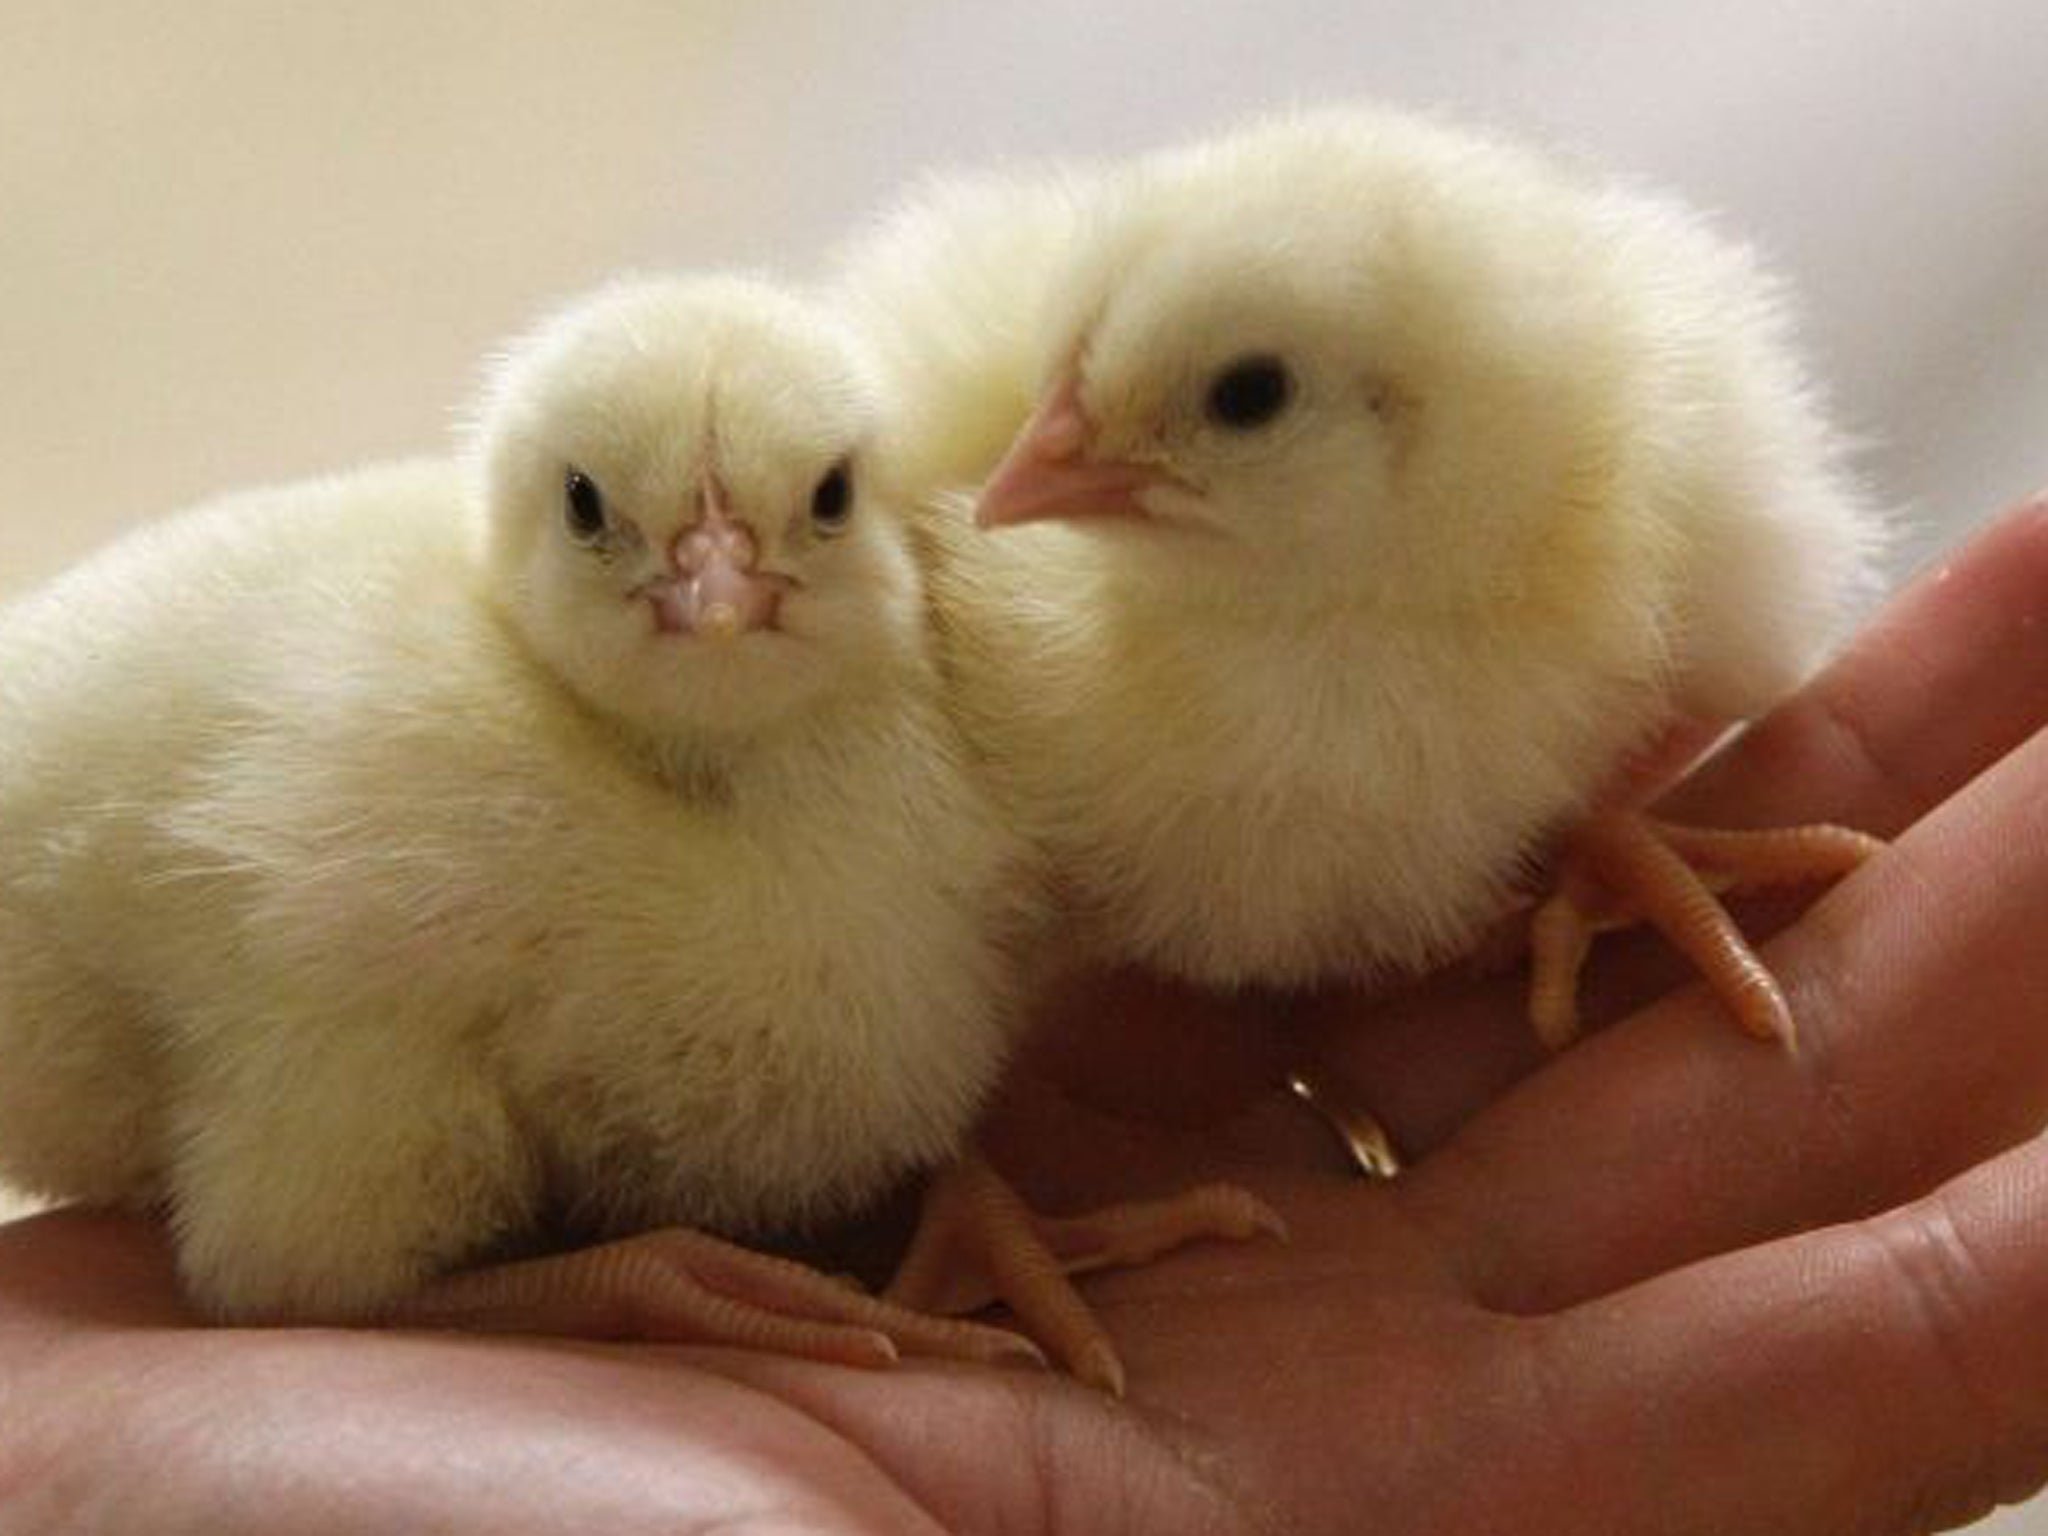 Newly-hatched chickens are capable of skills that it can take human babies months or even years to master